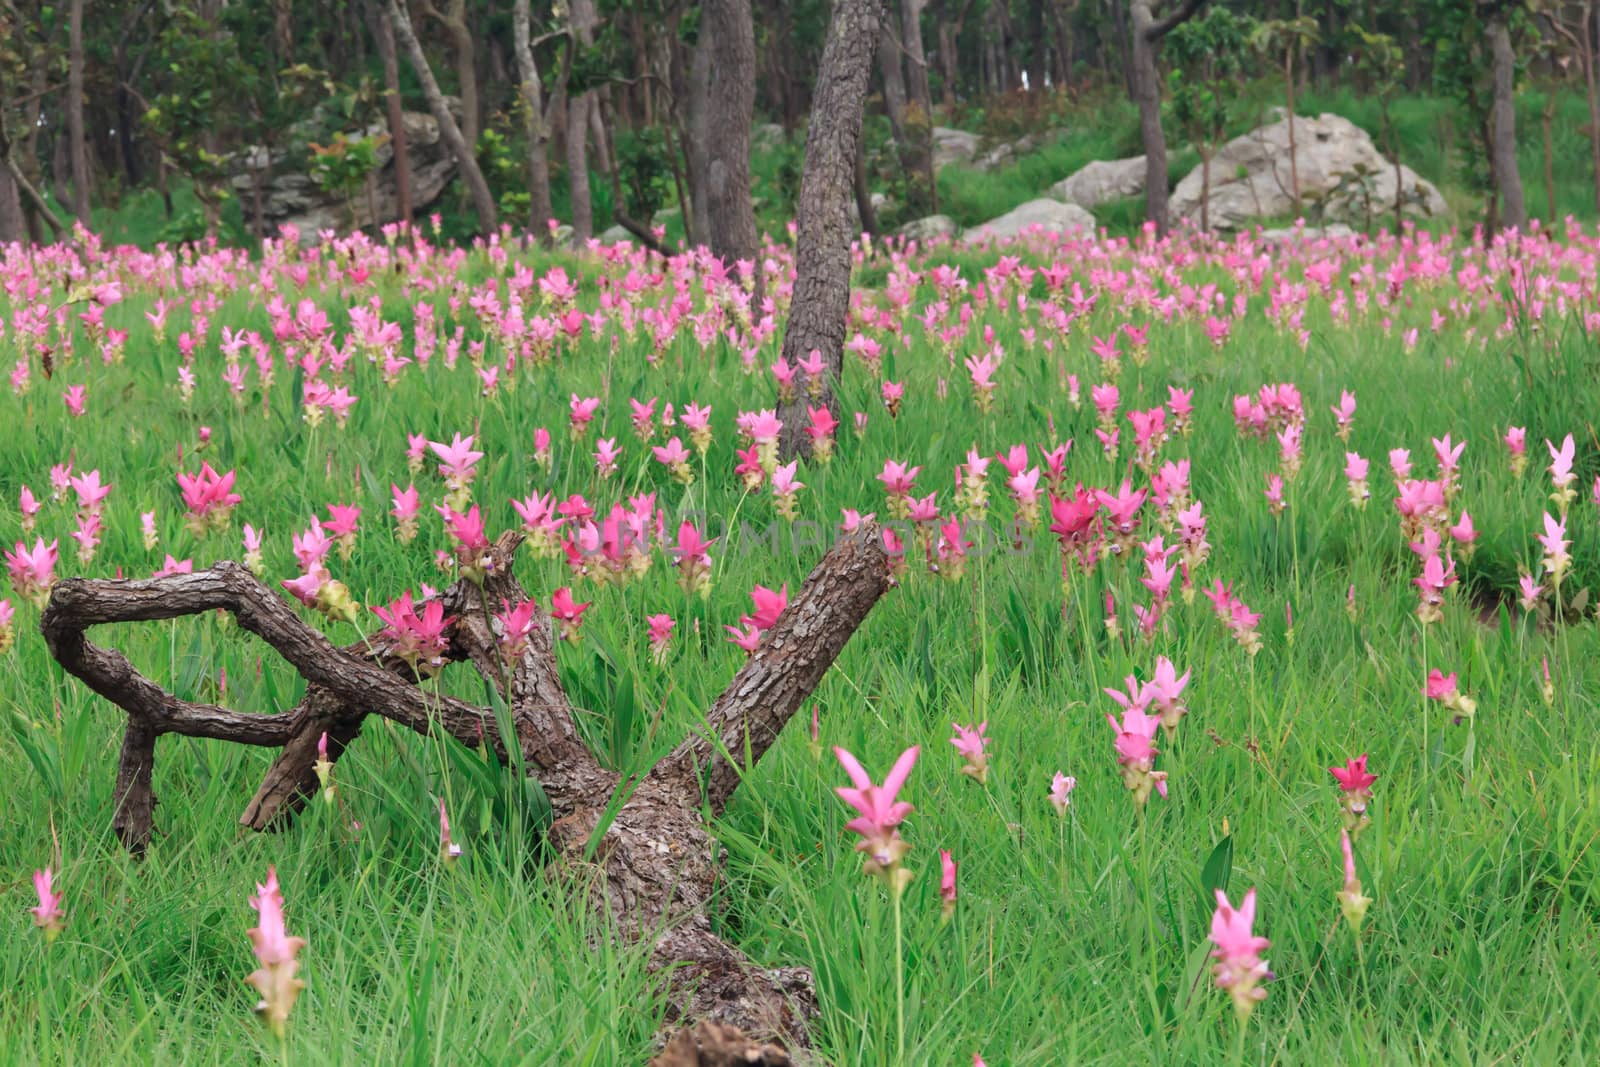 Wild siam tulips blooming in the jungle in Chaiyaphum province, Thailand.